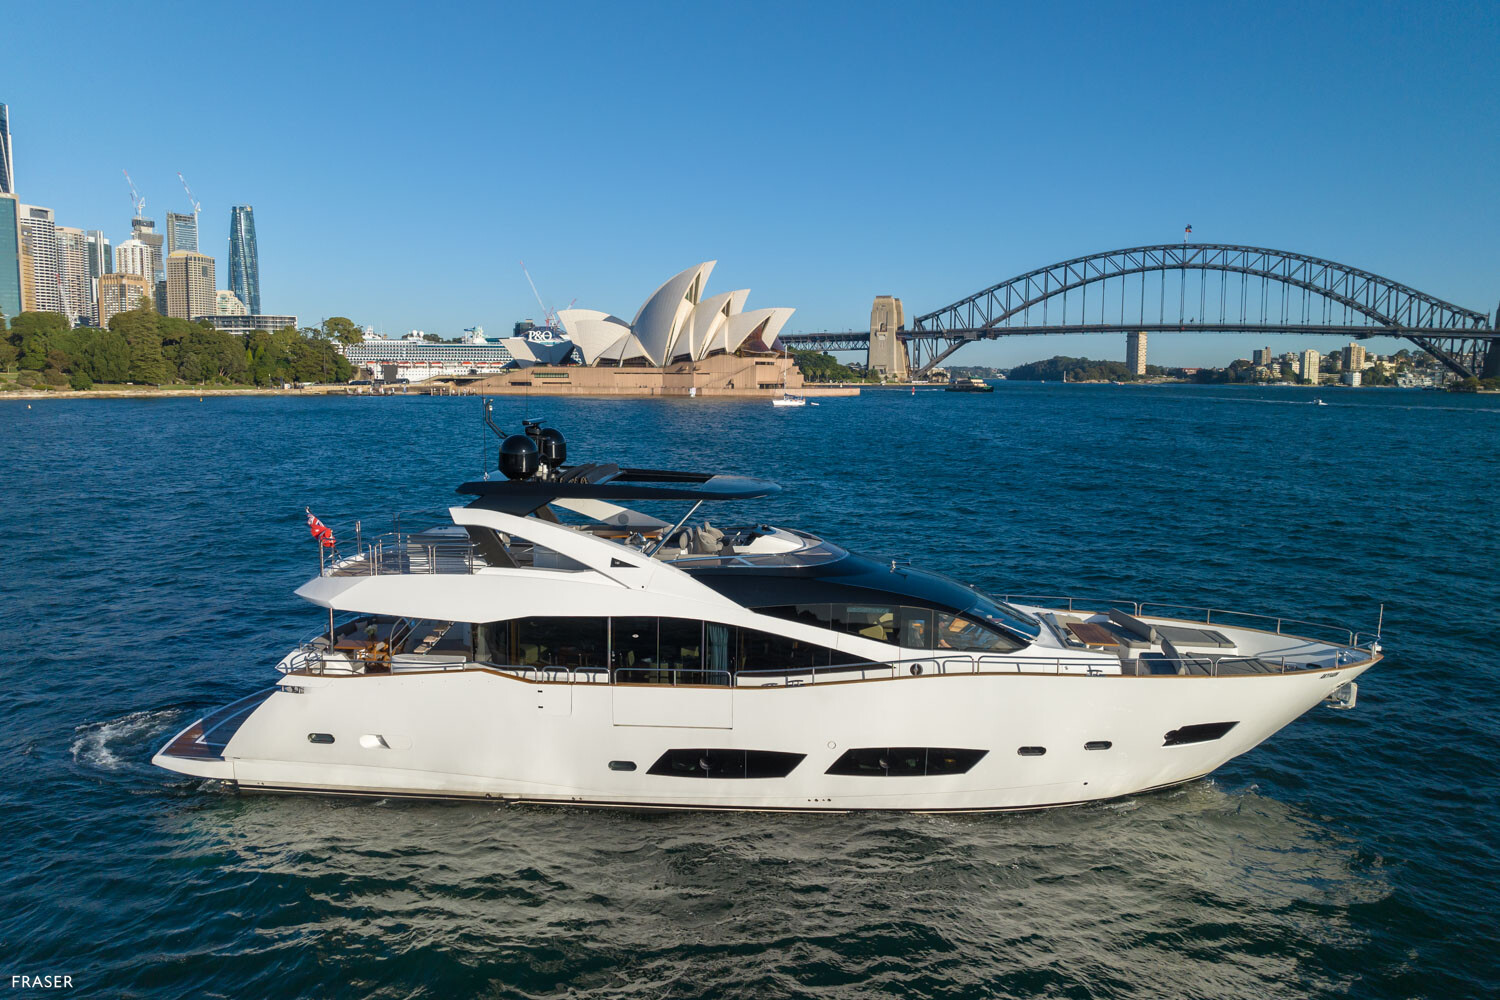 ULTRAVIOLET motor yacht for sale by FRASER, built by Sunseeker